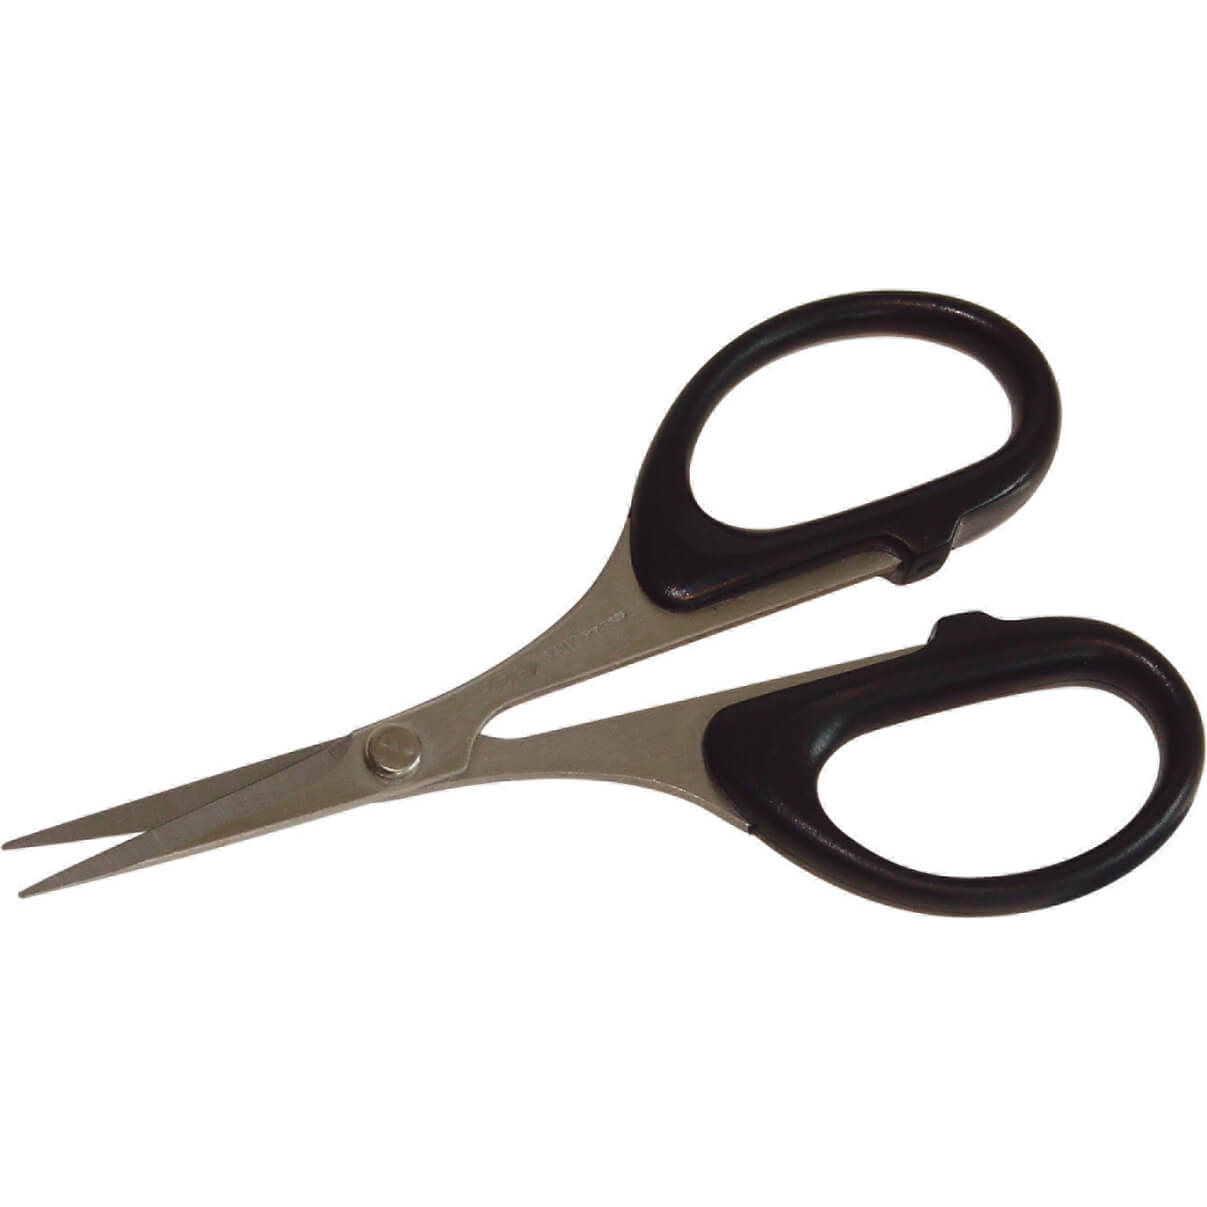 Image of CK Embroidery Scissors